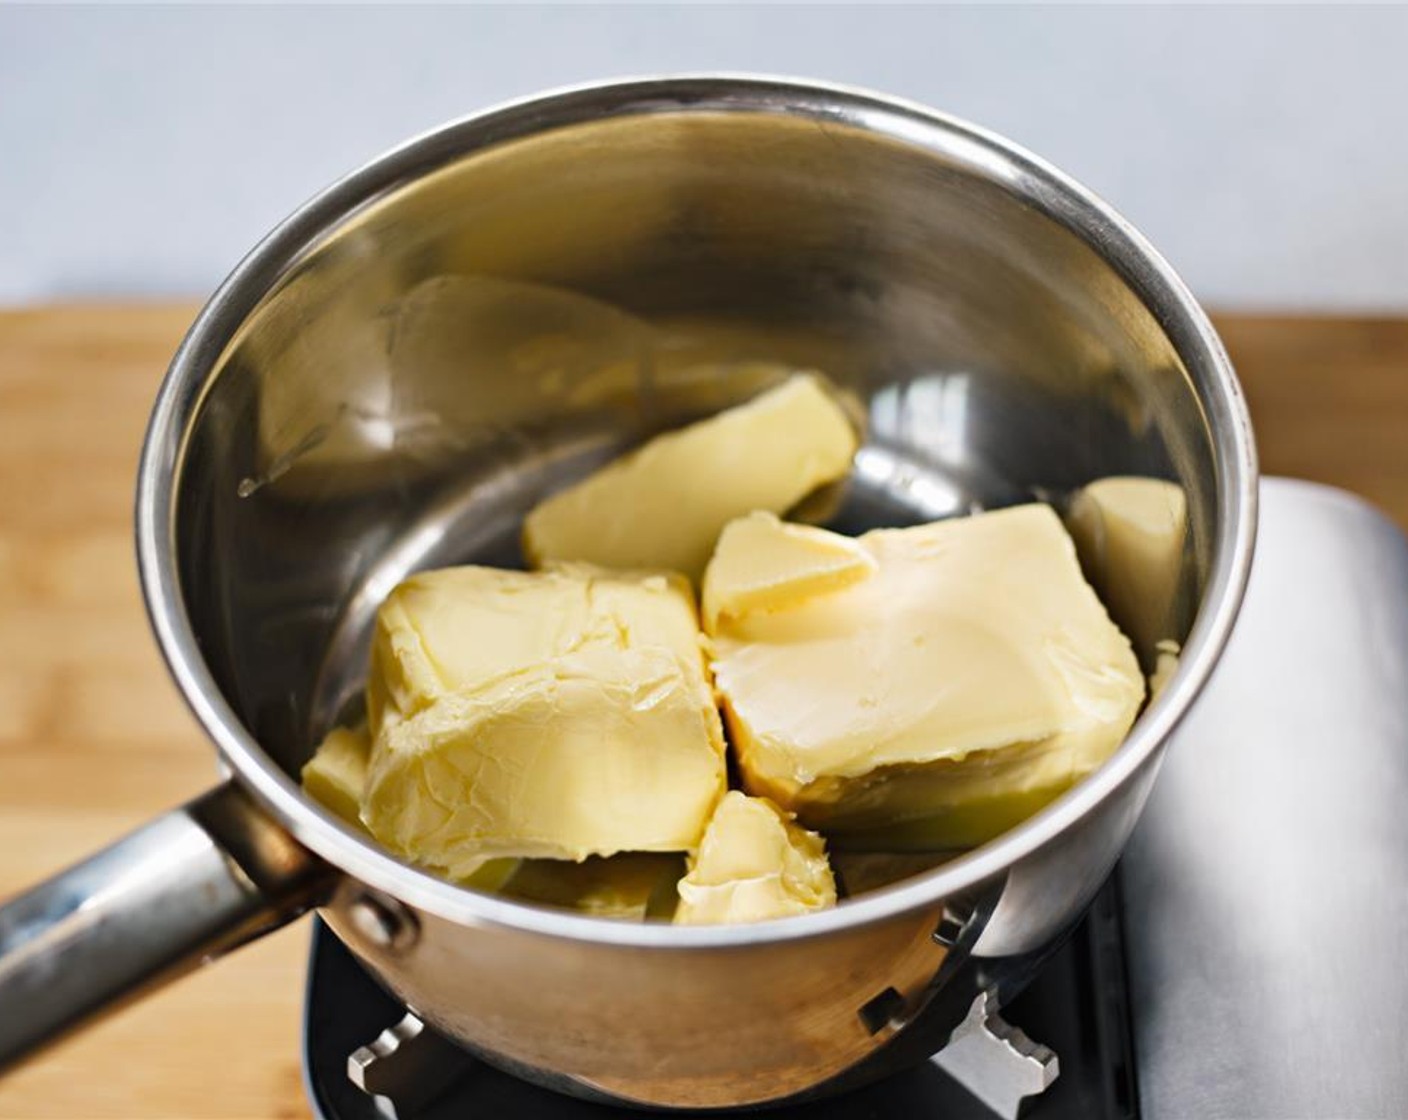 step 1 Add Unsalted Butter (1 cup) to a saucepan, and melt over low heat.